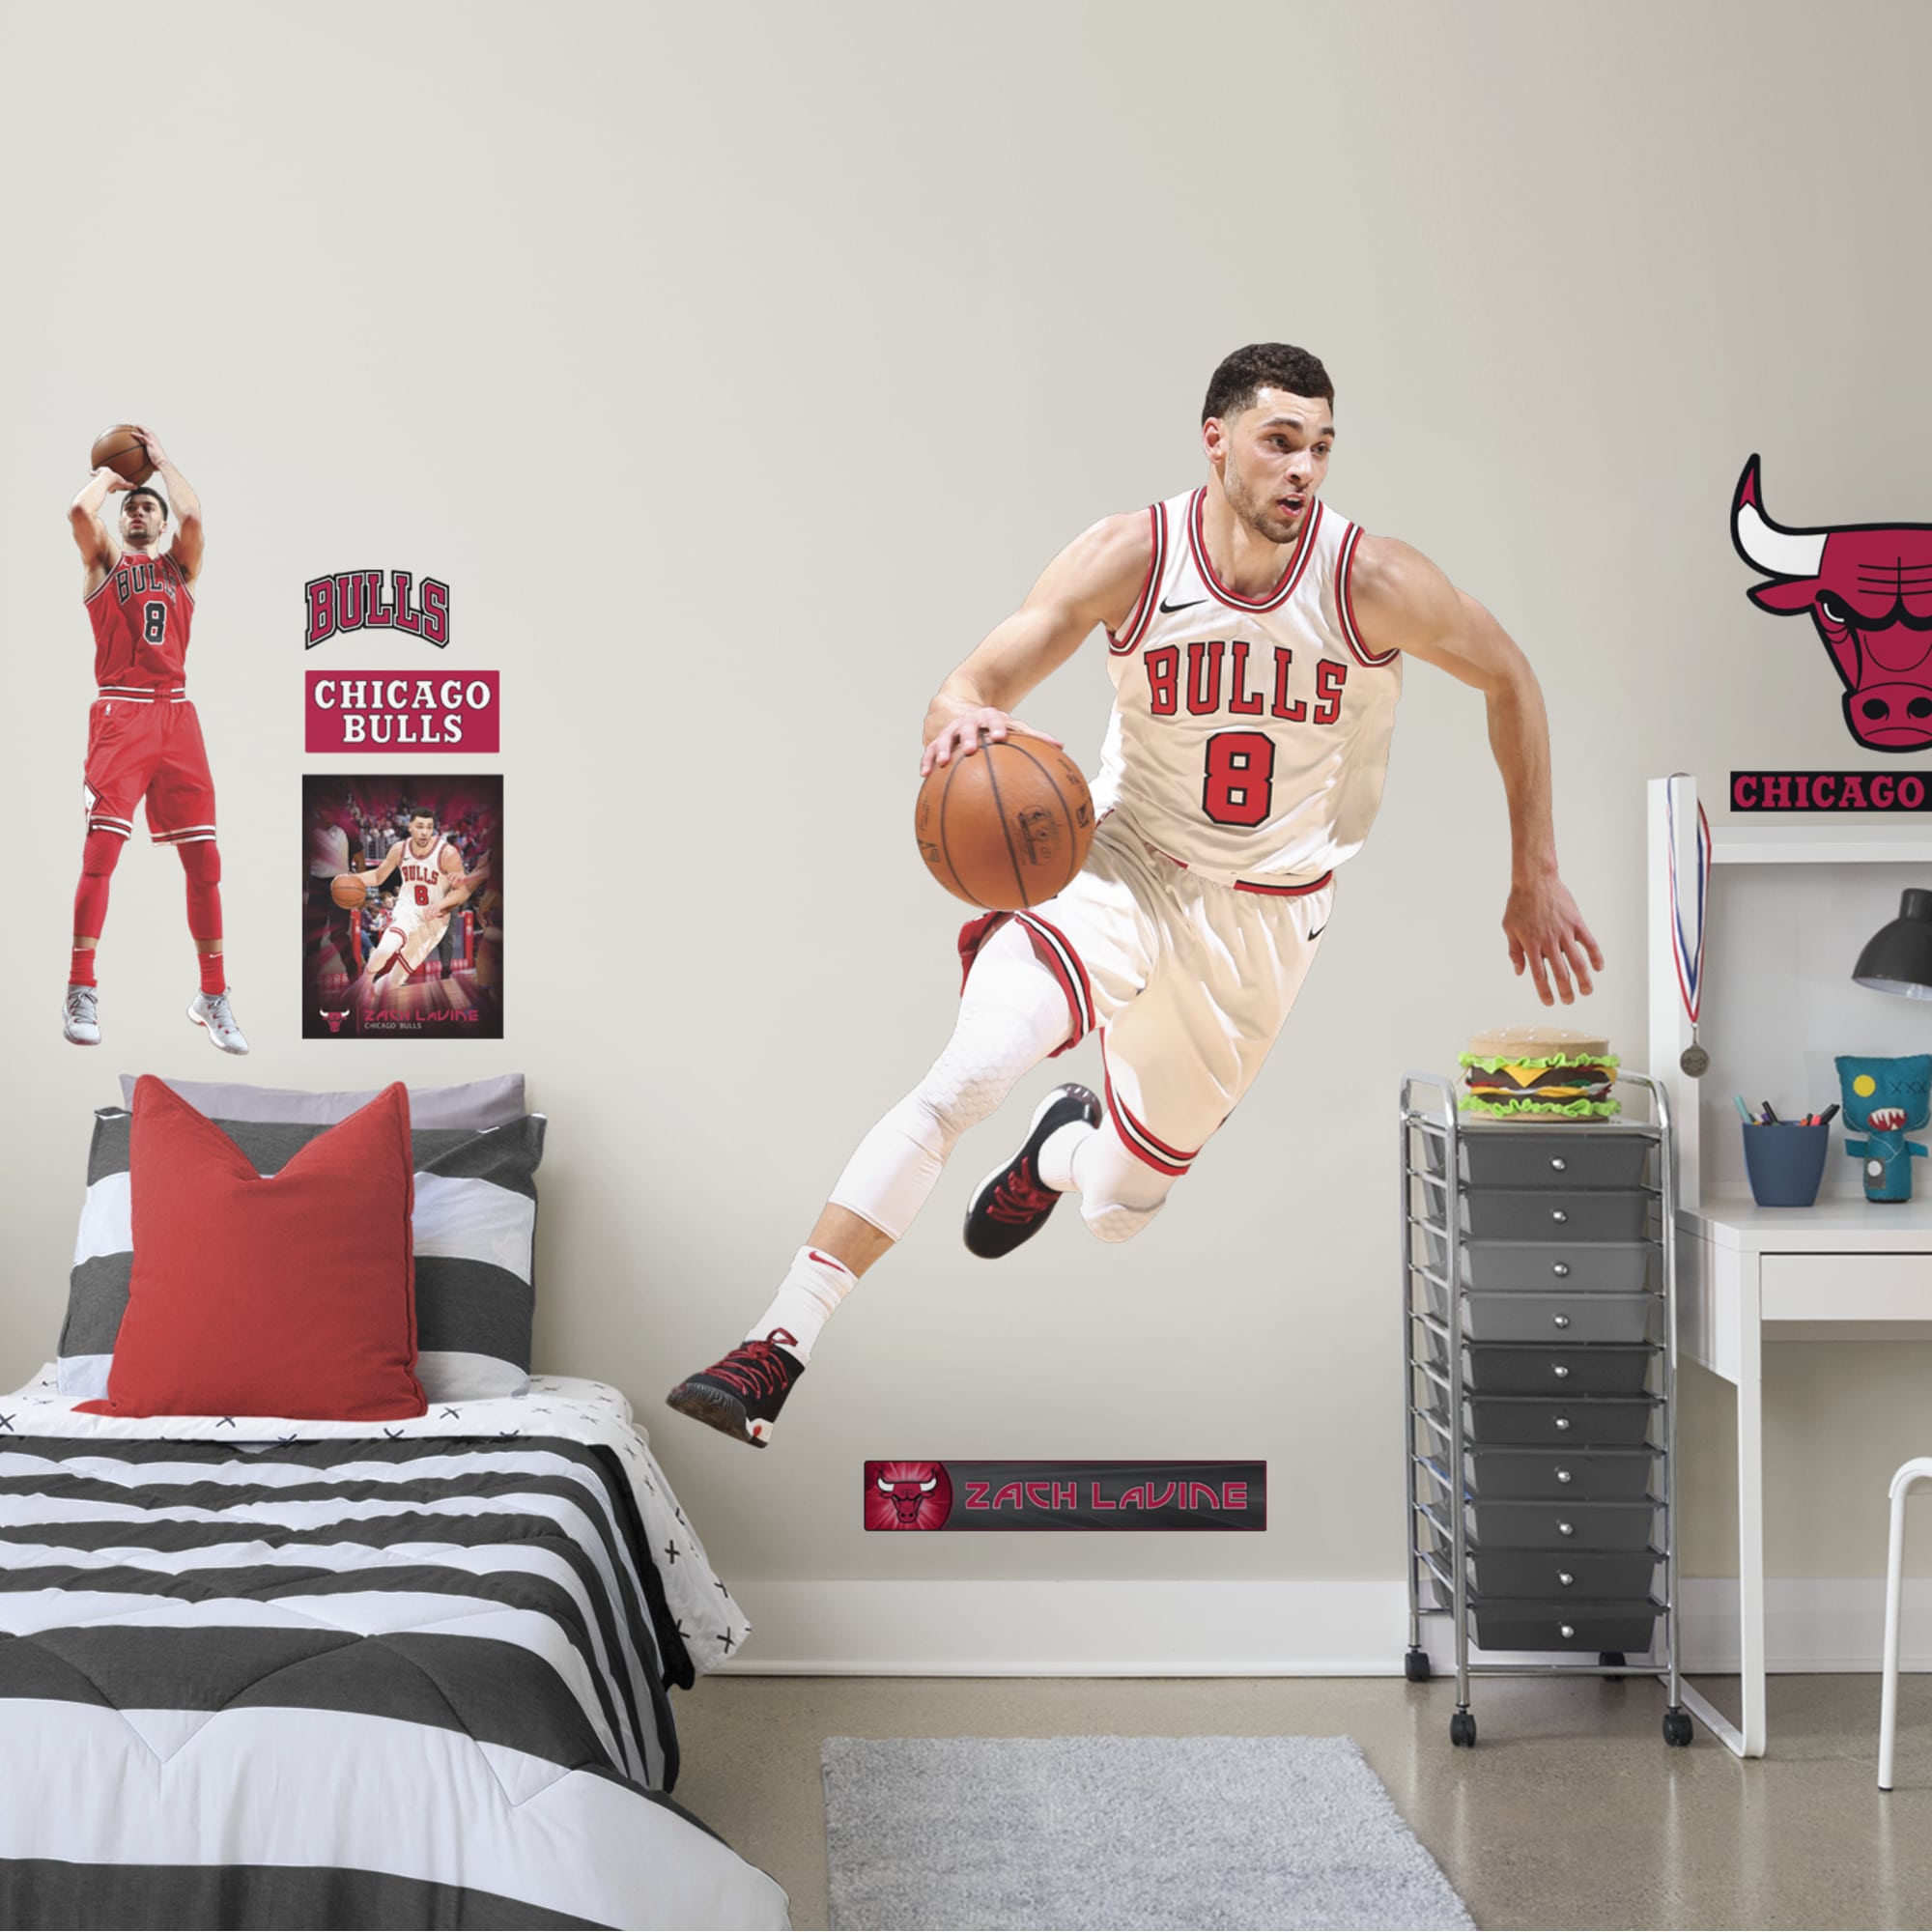 Zach LaVine for Chicago Bulls - Officially Licensed NBA Removable Wall Decal Life-Size Athlete + 15 Decals (60"W x 70"H) by Fath